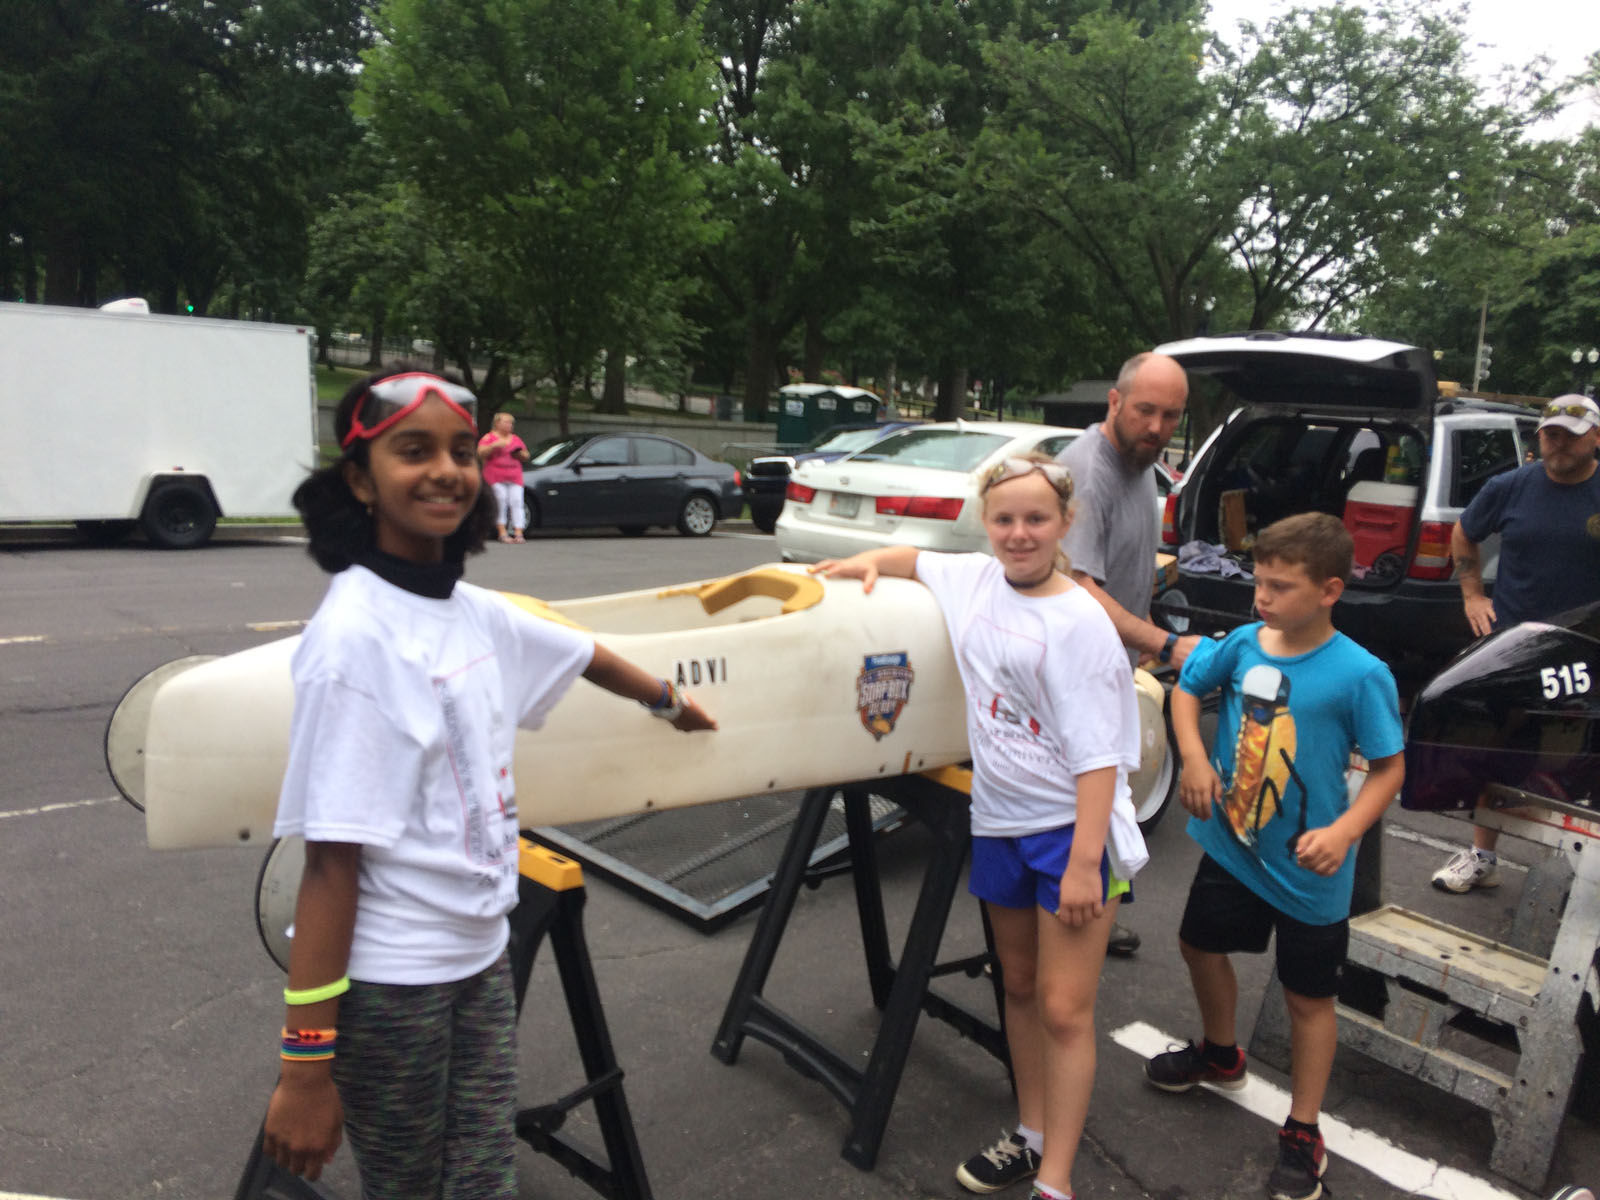 Advi Vallaban and Liv Pennington were two of about 30 kids competed today in the 76th annual Greater Washington DC All-American Soap Box Derby. (Dick Uliano/WTOP)